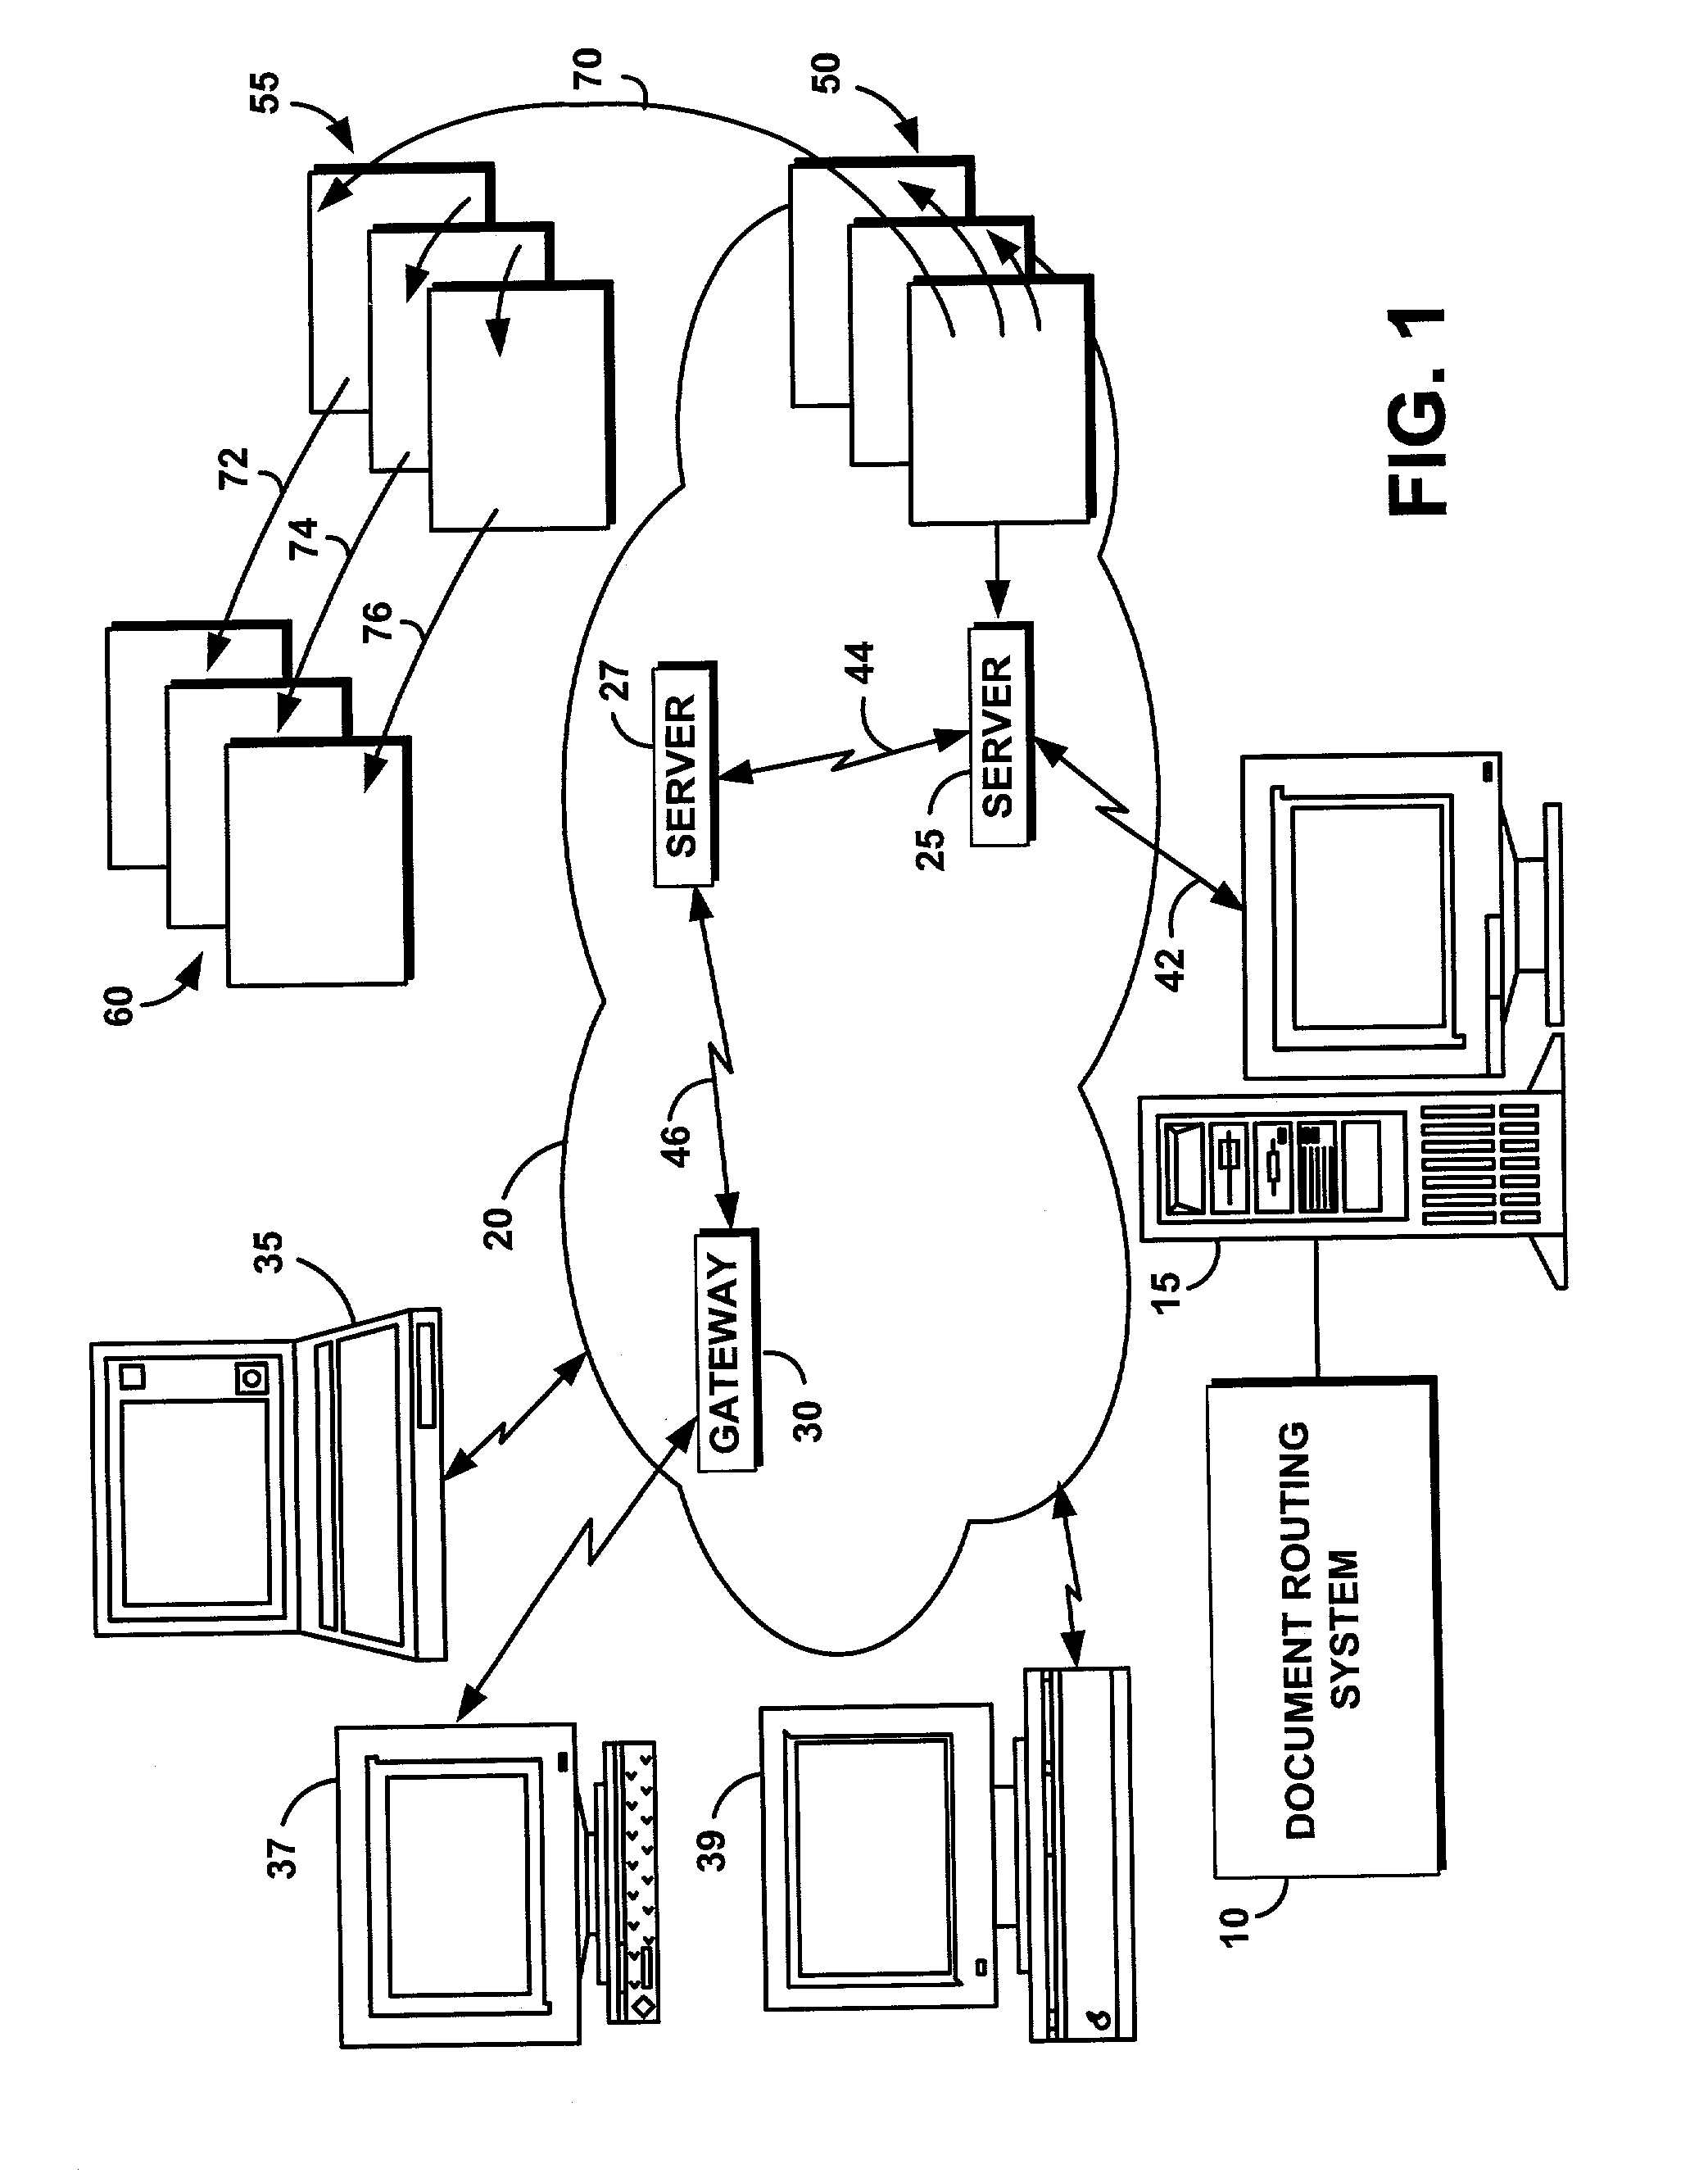 Object-oriented framework for document routing service in a content management system